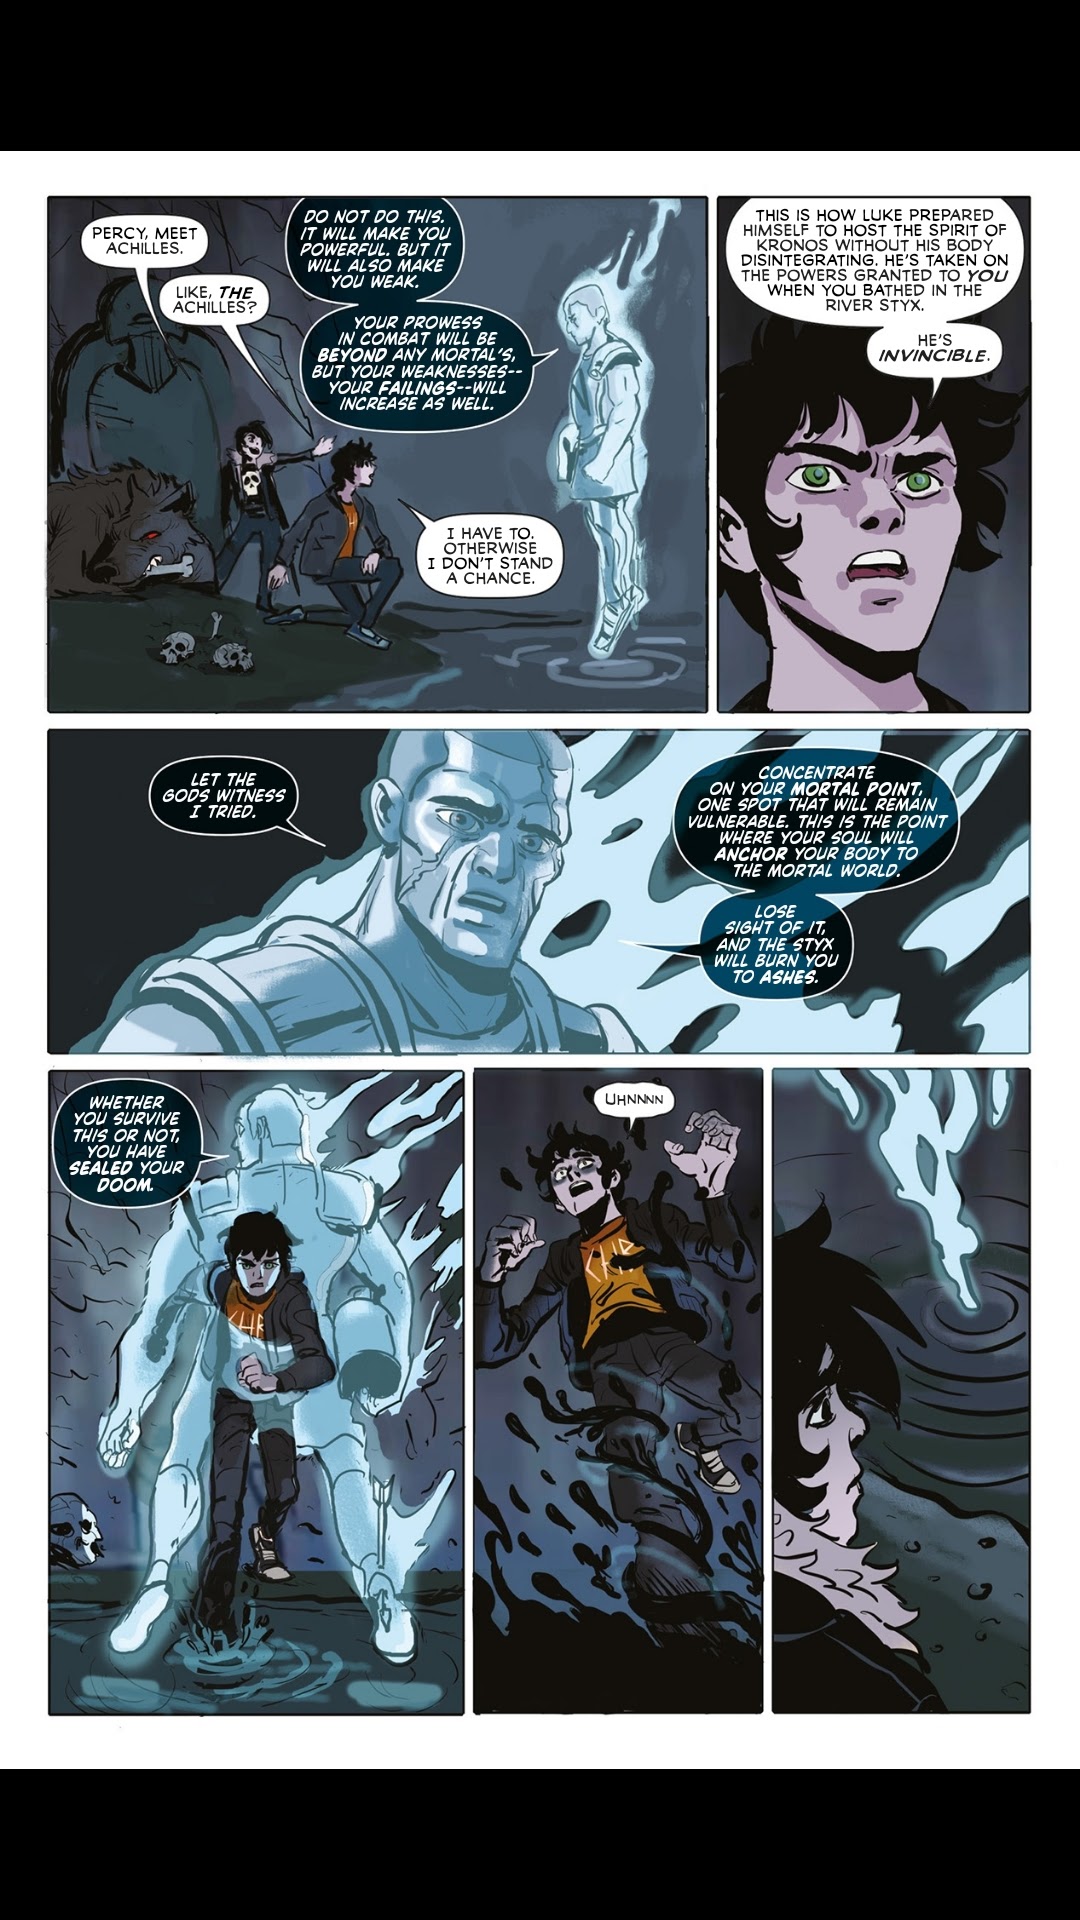 Read online Percy Jackson and the Olympians comic -  Issue # TPB 5 - 44